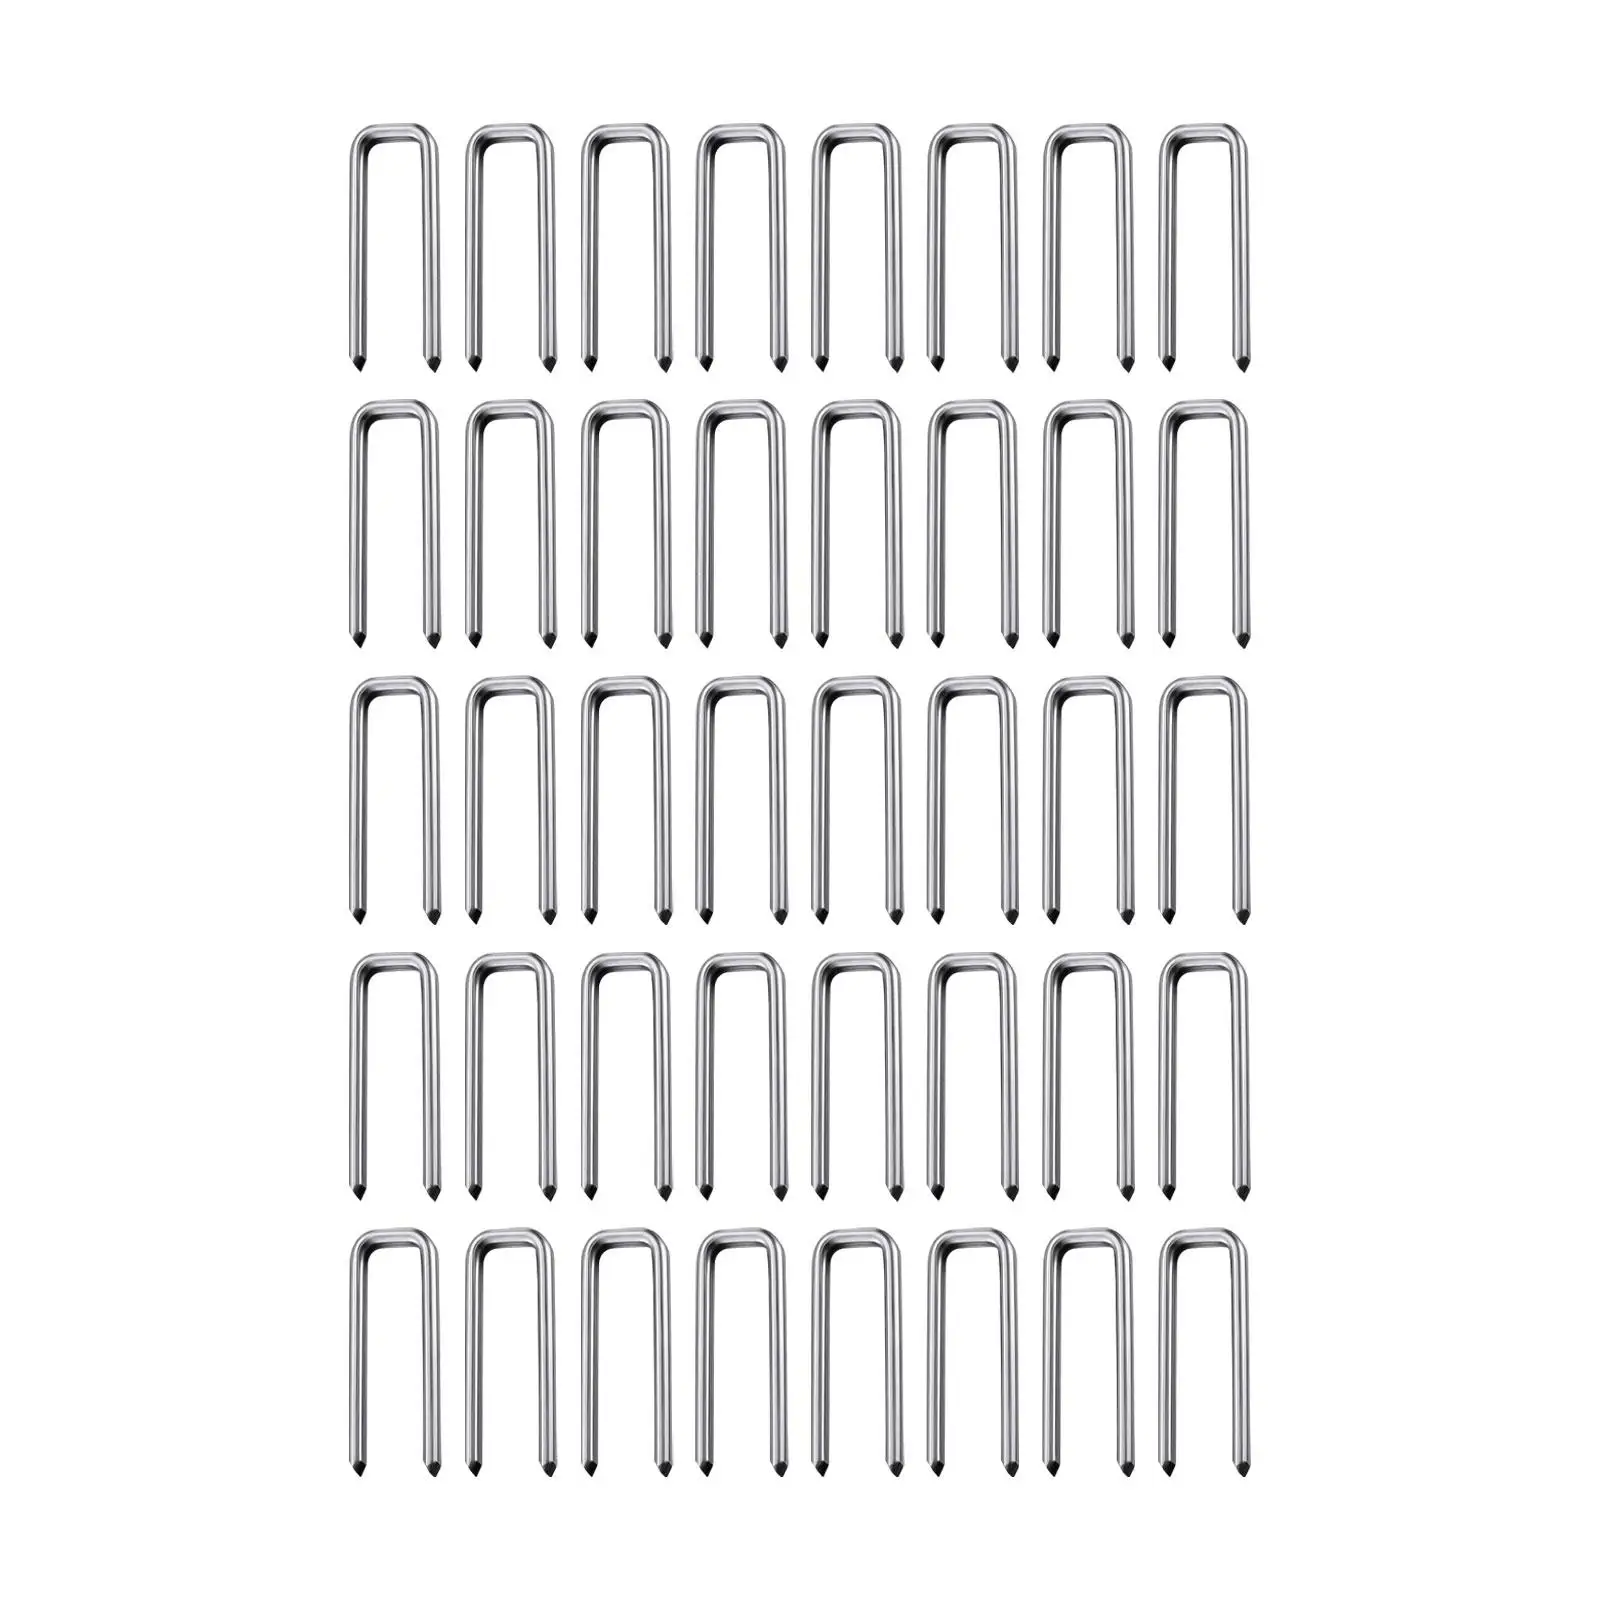 40 Pieces Plantation Shutter Repair Set Blinds Nails for Home Office Windows